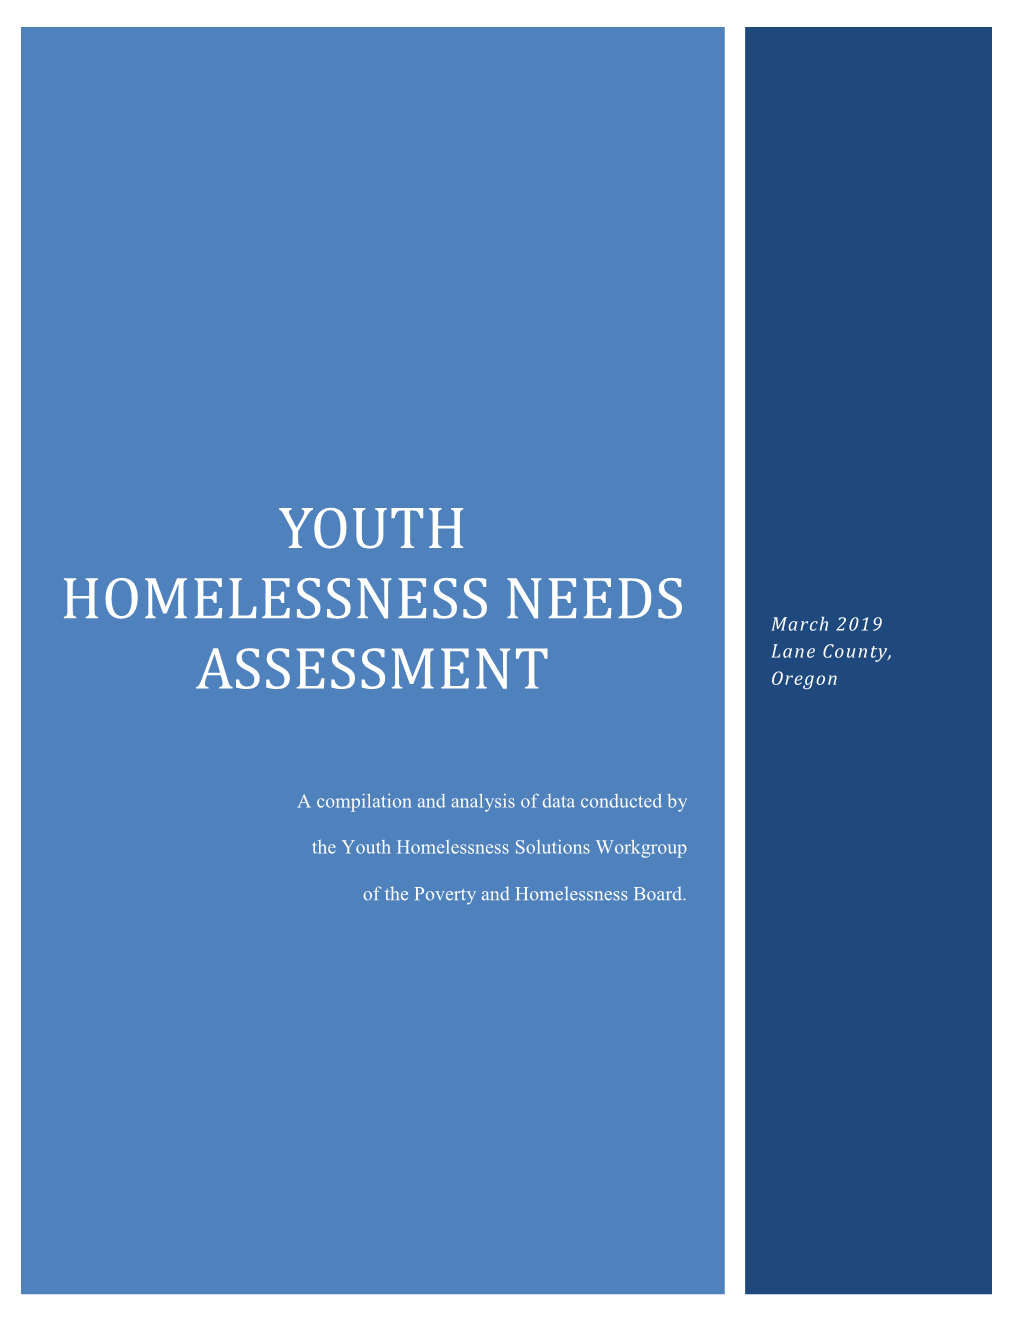 Youth Homelessness Needs Assessment 2019